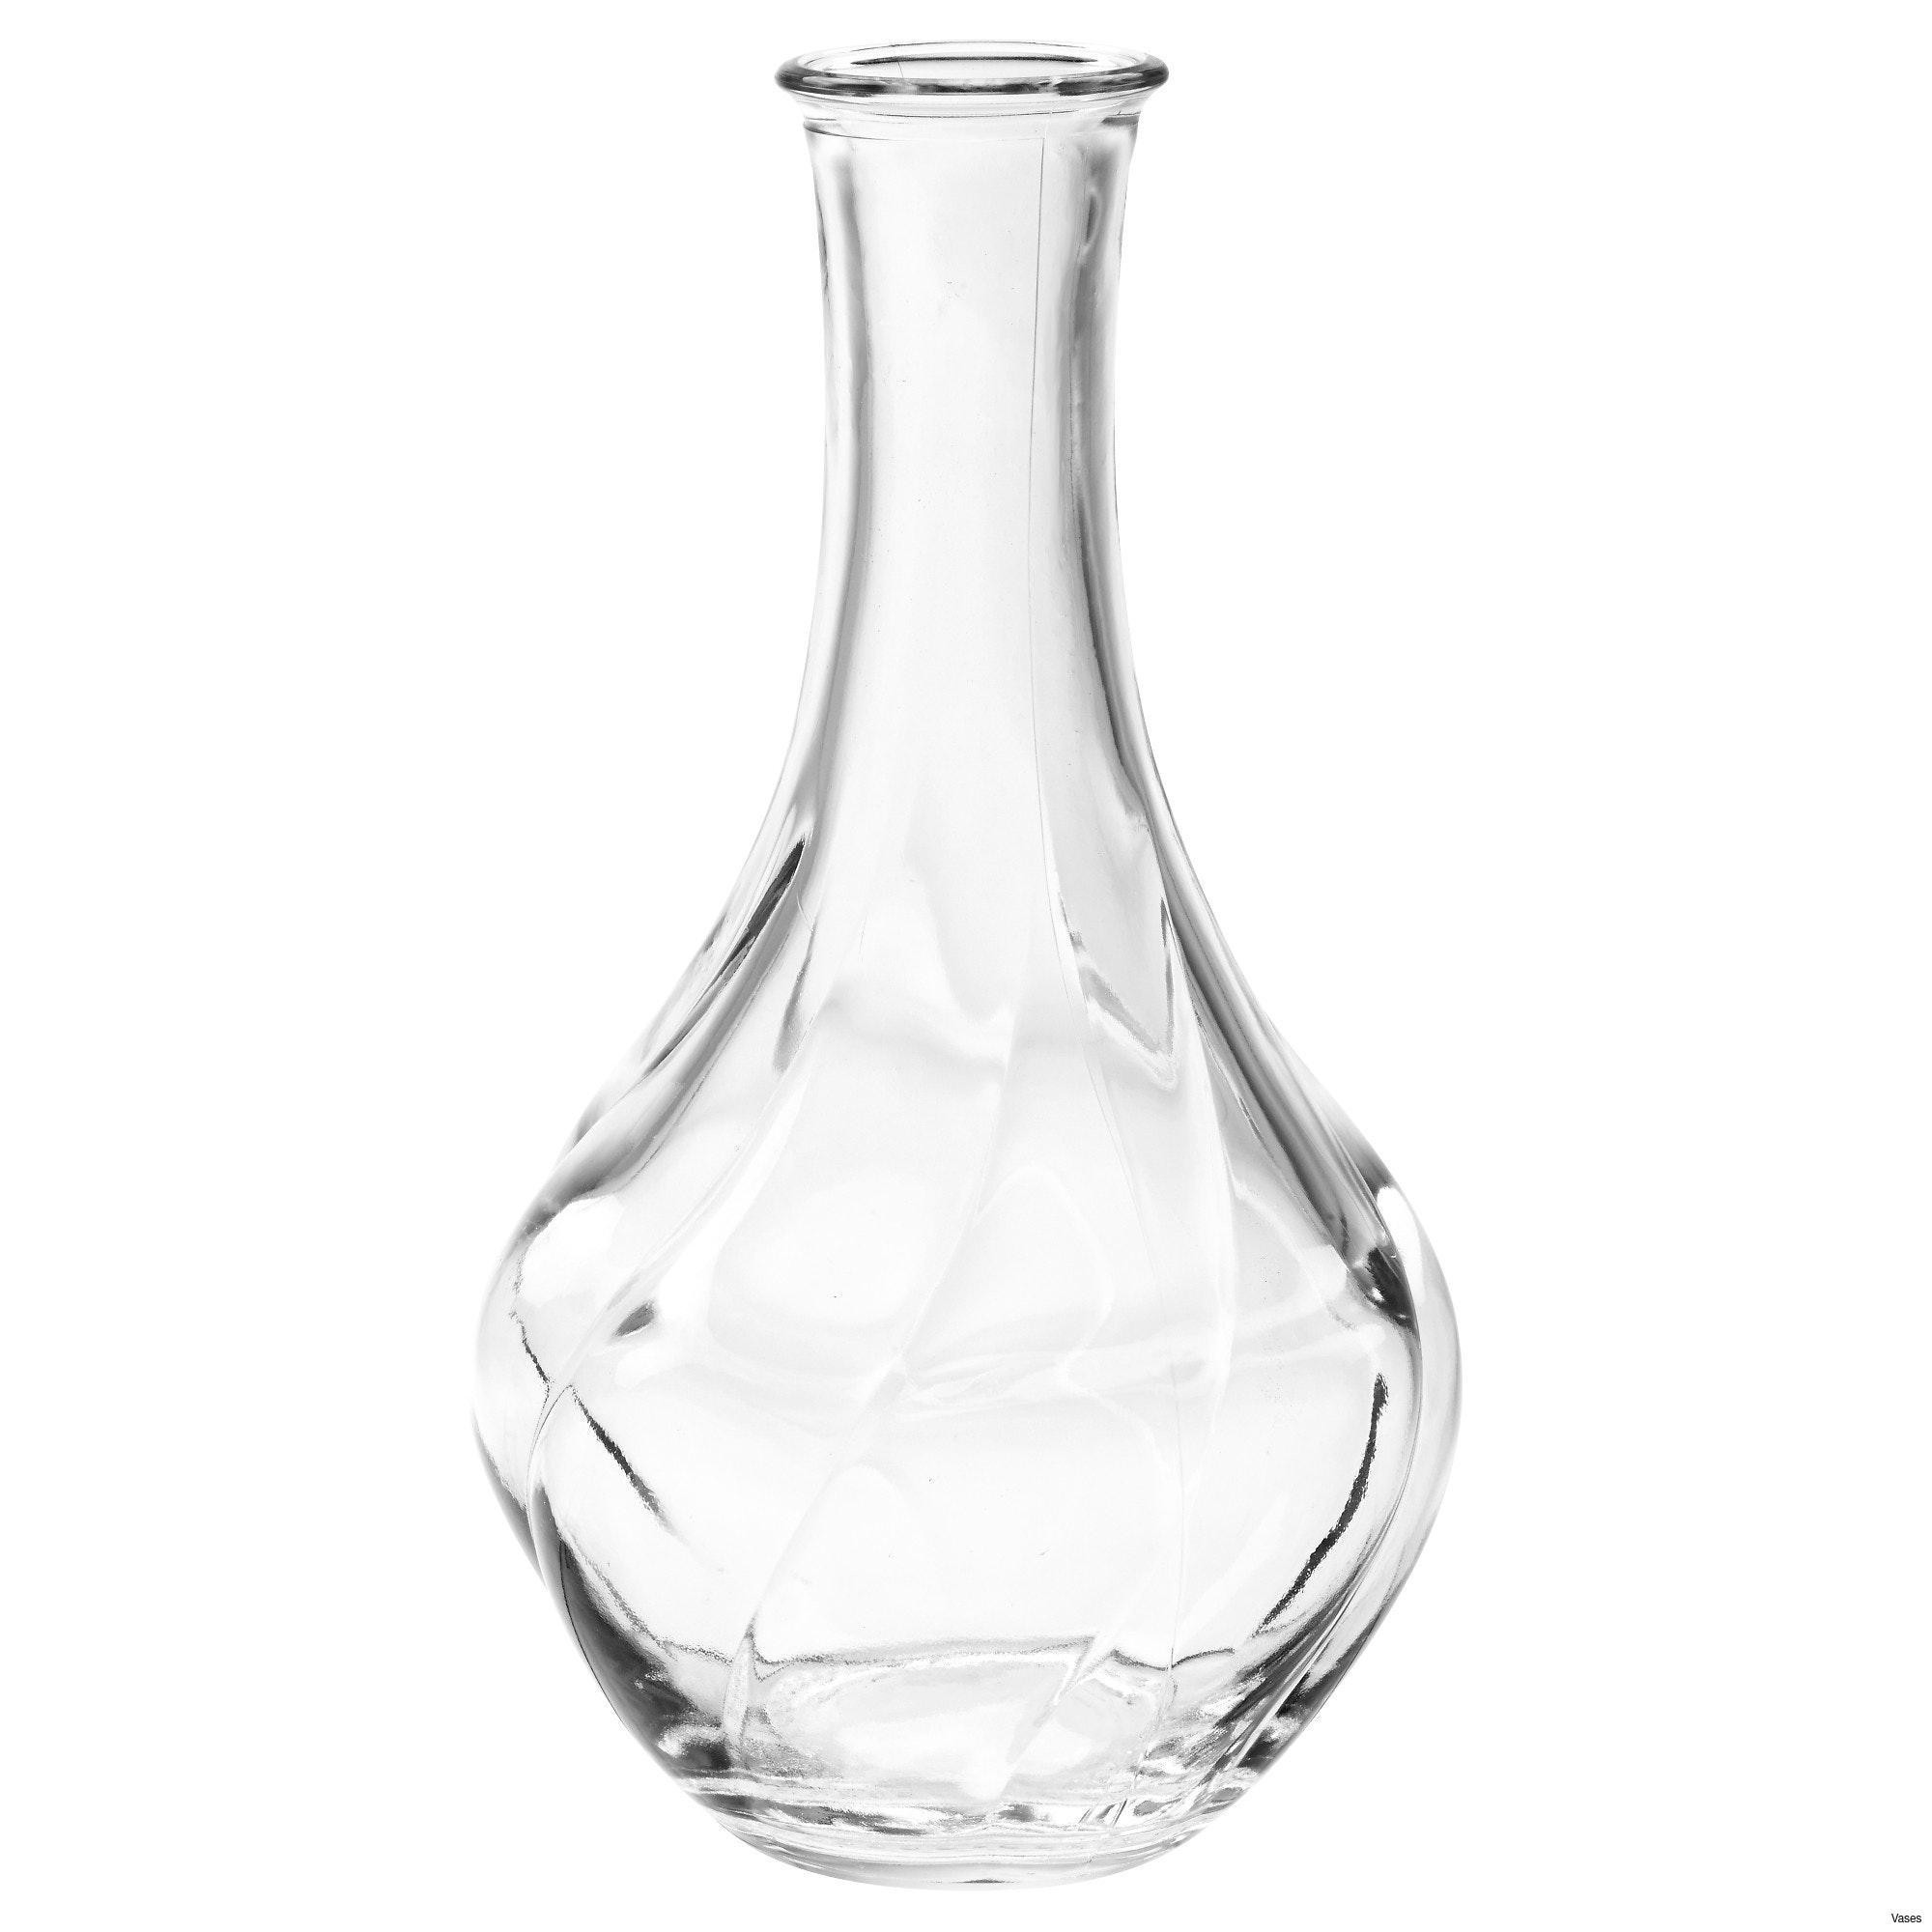 17 Lovely Shannon Crystal Vase 2024 free download shannon crystal vase of glass vases with lids gallery living room glass vase fresh 2h vases regarding glass vases with lids image living room glass vases fresh clear vase 0d tags amazing and